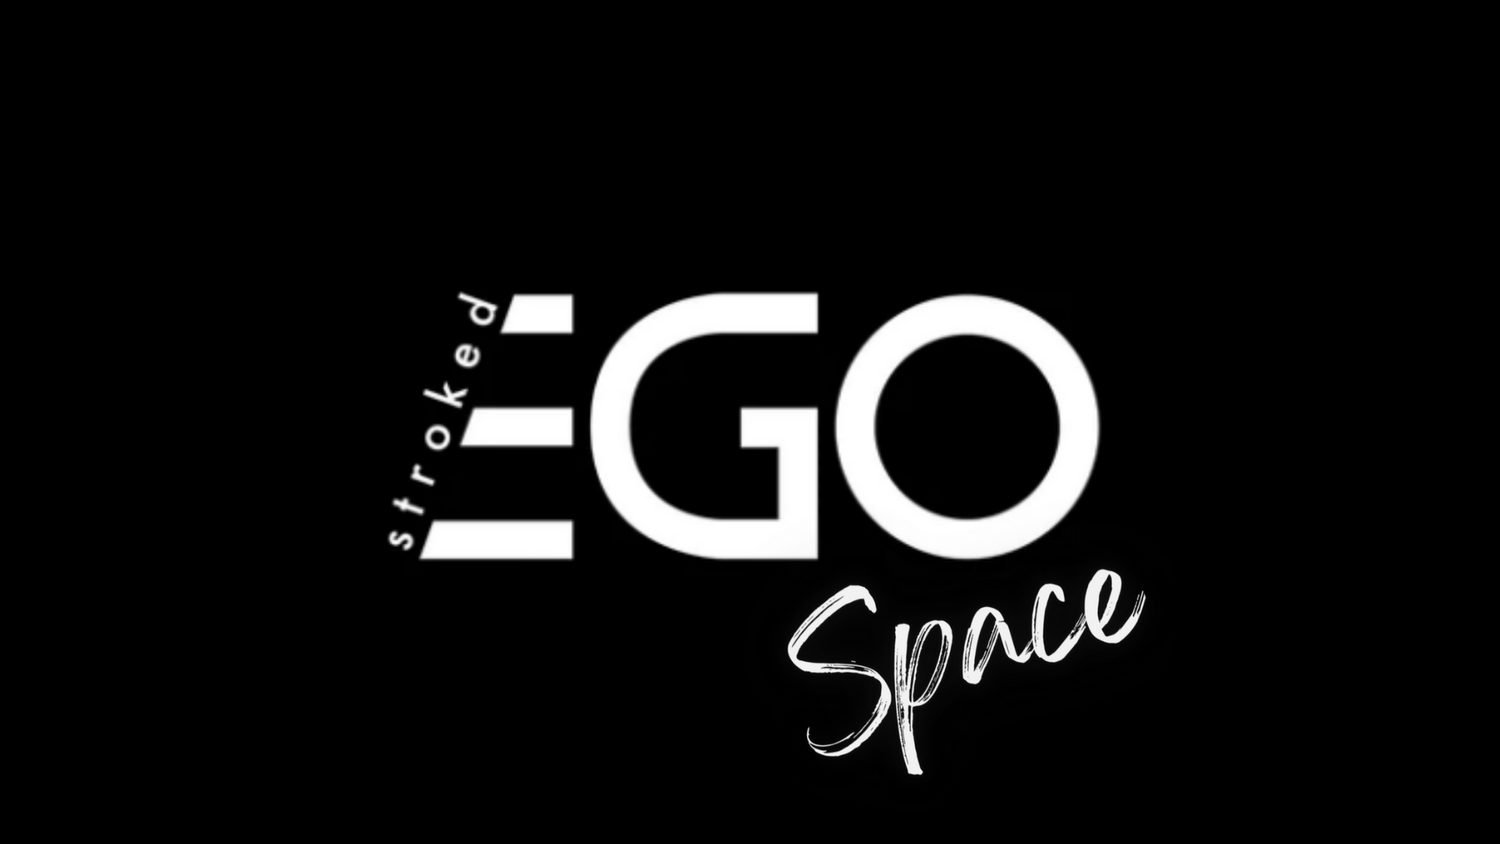 Introducing Ego Space